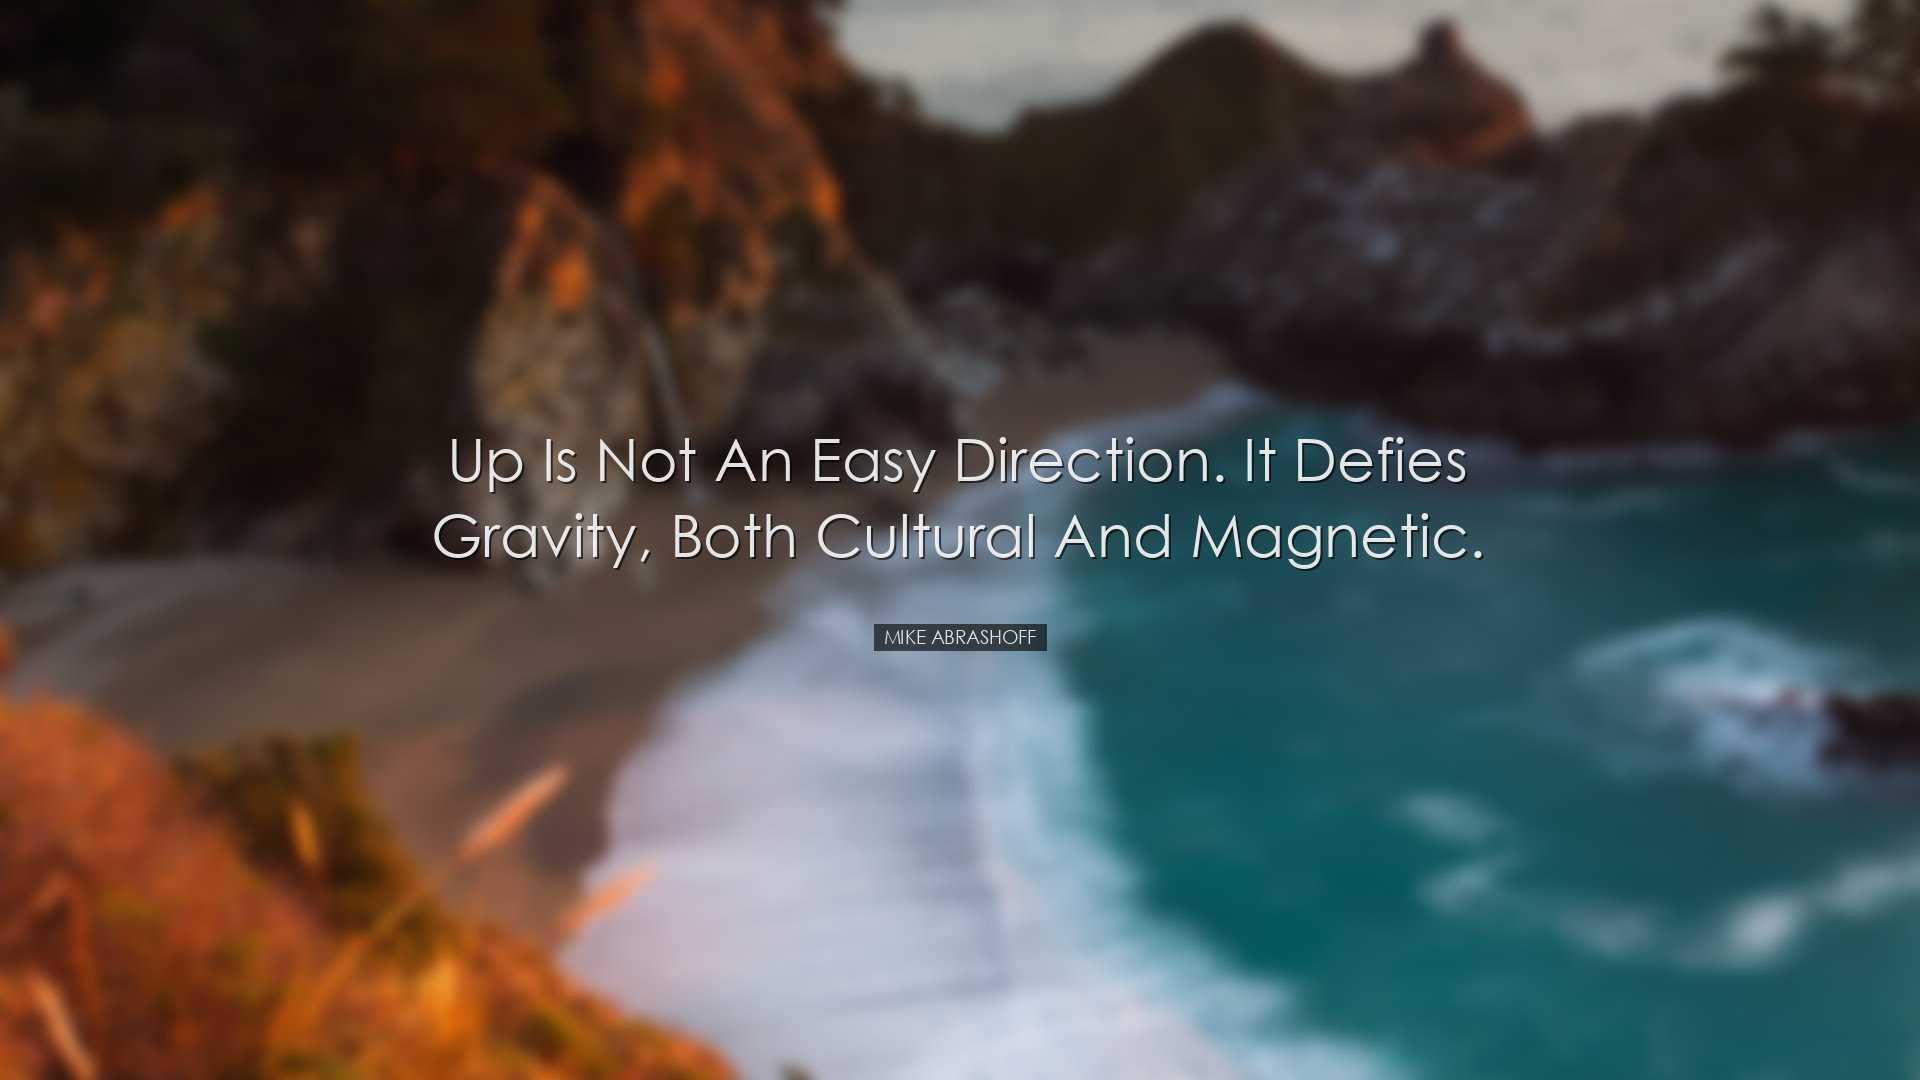 Up is not an easy direction. It defies gravity, both cultural and